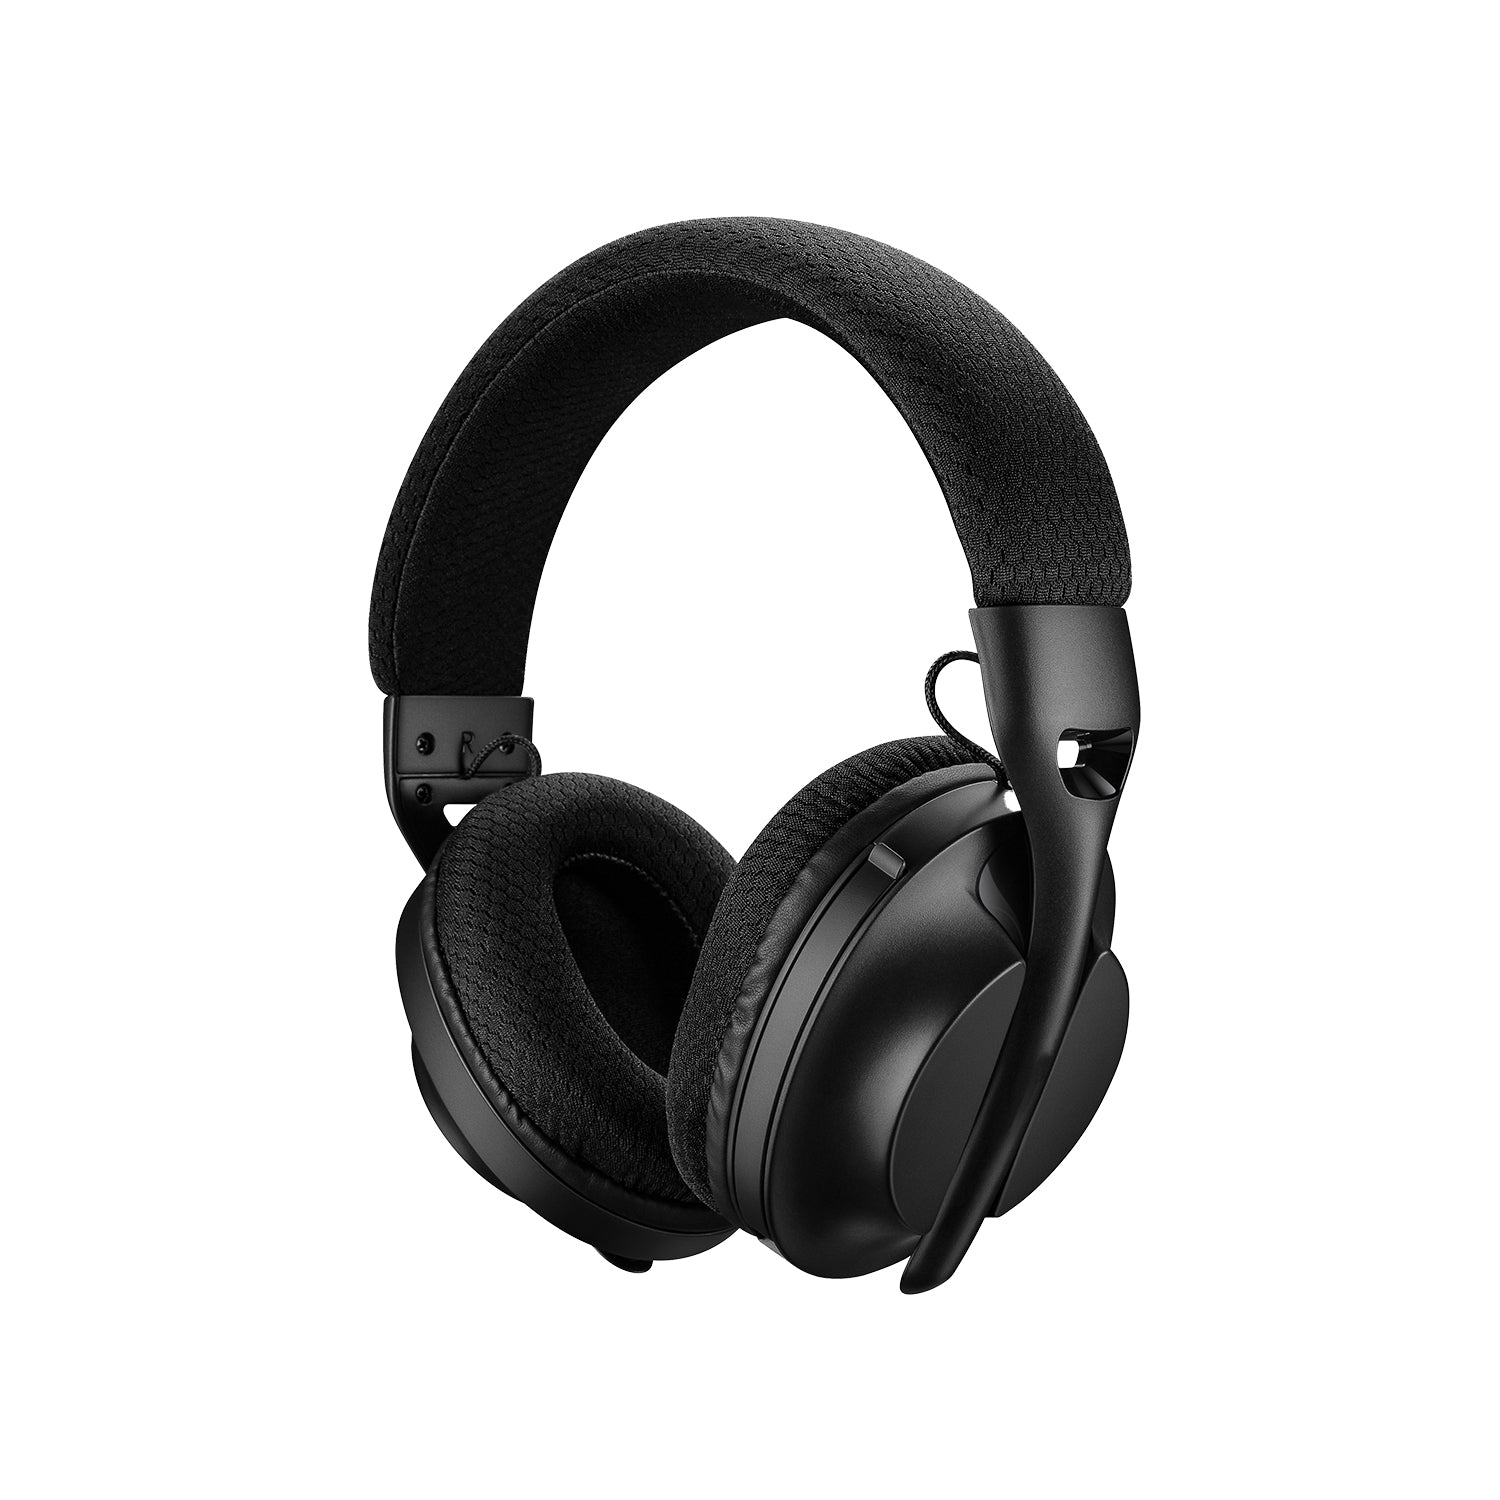 M360 Tri-Mode Gaming Headset Angled View